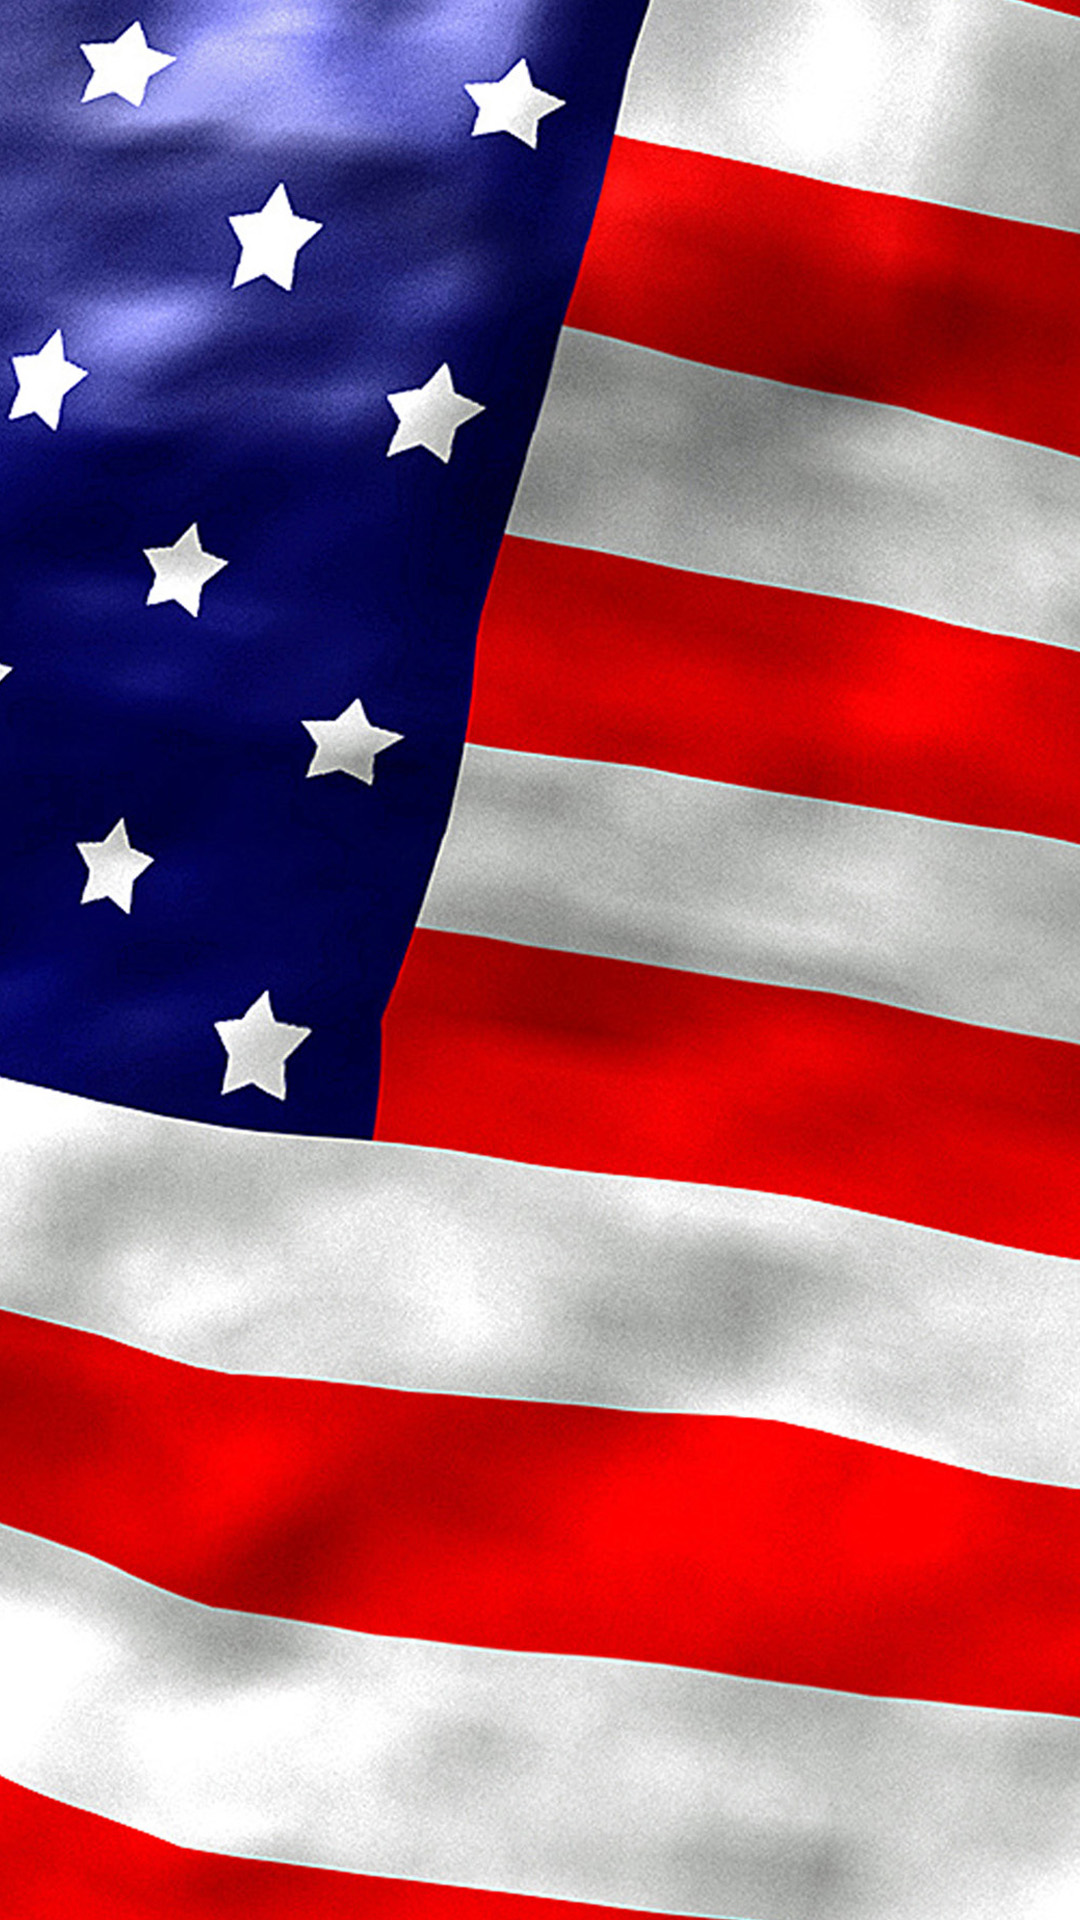 Free Download American Flag Iphone Backgrounds